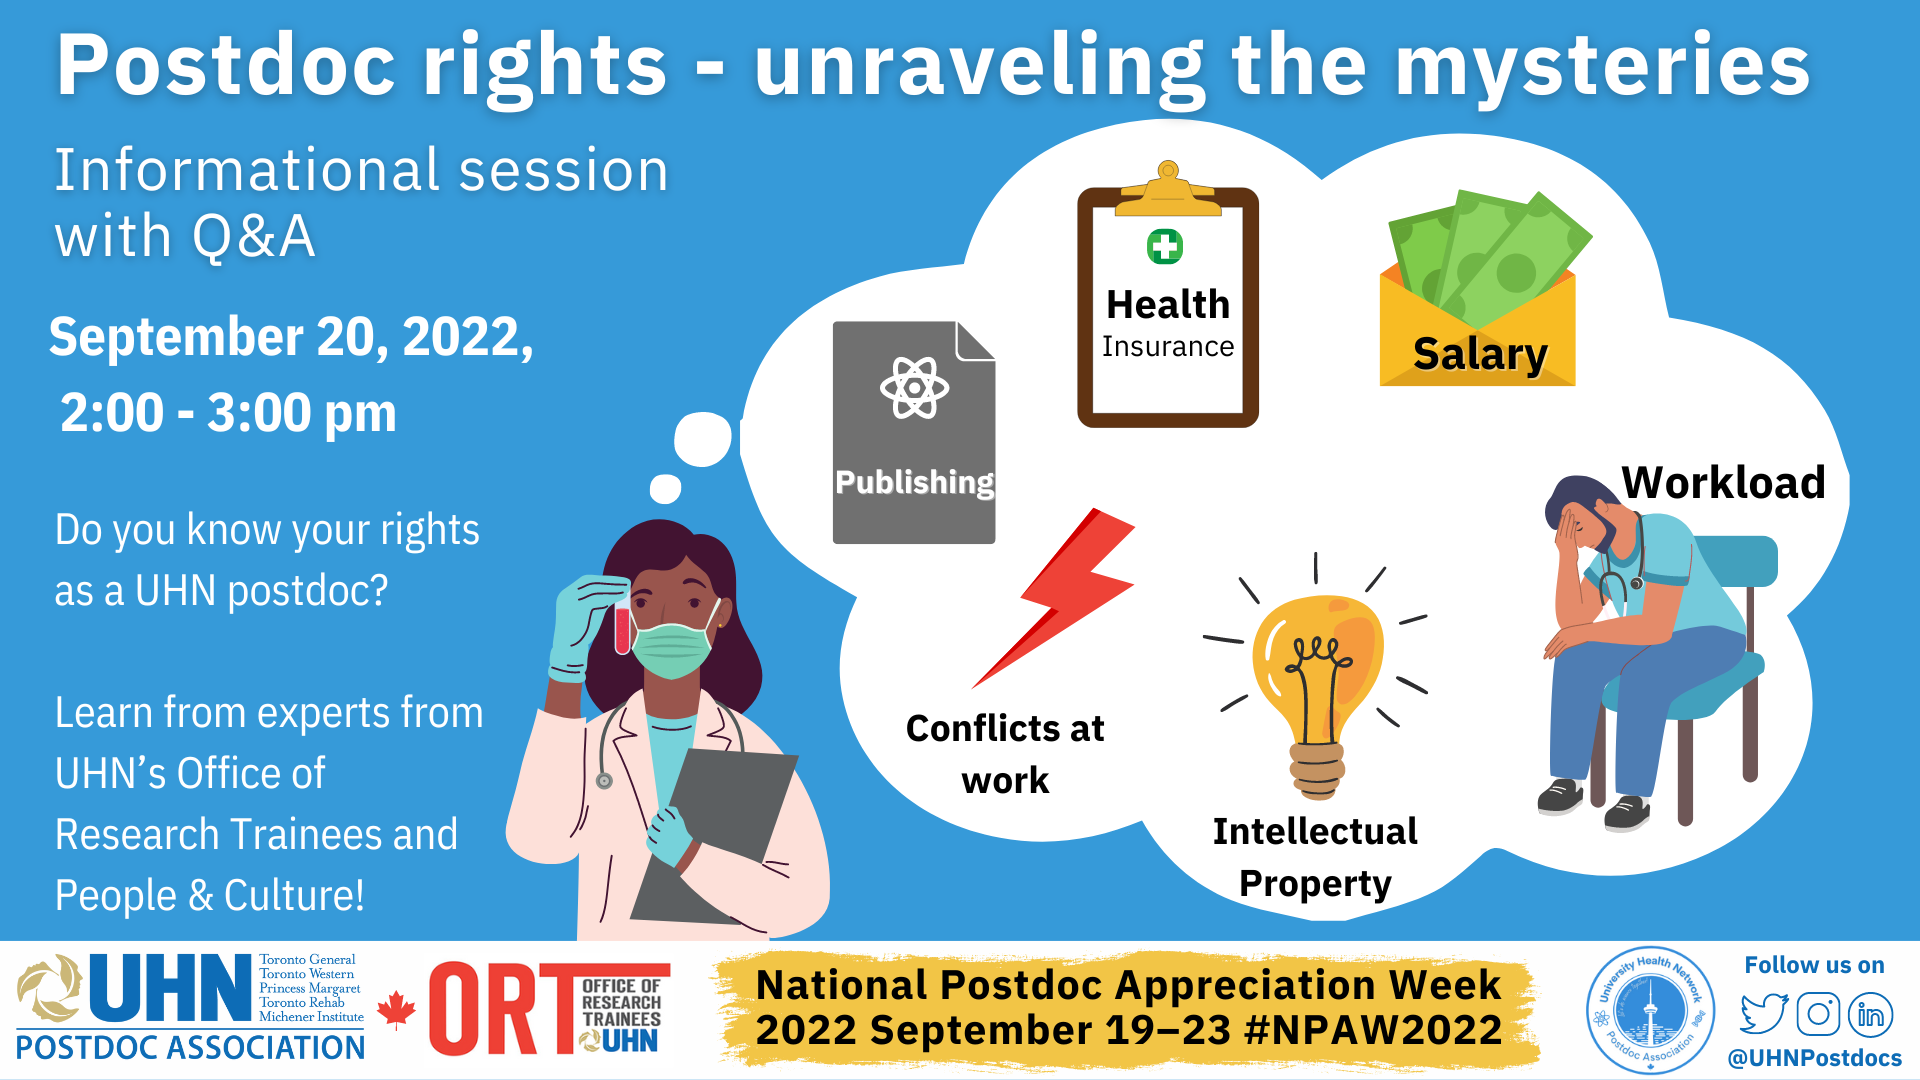 Poster for Day 2 of postdoc appreciation week. At the bottom is a banner with the UHN Postdoc Association logo, the ORT logo, National Postdoc Appreciation Week, 2022 September 19-23. #NPAW2022 and the details for how to follow the UHNPA on Twitter, Instagram and LinkedIn. The poster reads postdoc rights - unravelling the mysteries. Information session and Q&A, September 20th, 2022, 2-3 pm. Do you know your rights as a postdoc? Learn from experts from the Office of Research Trainees and People and Culture!